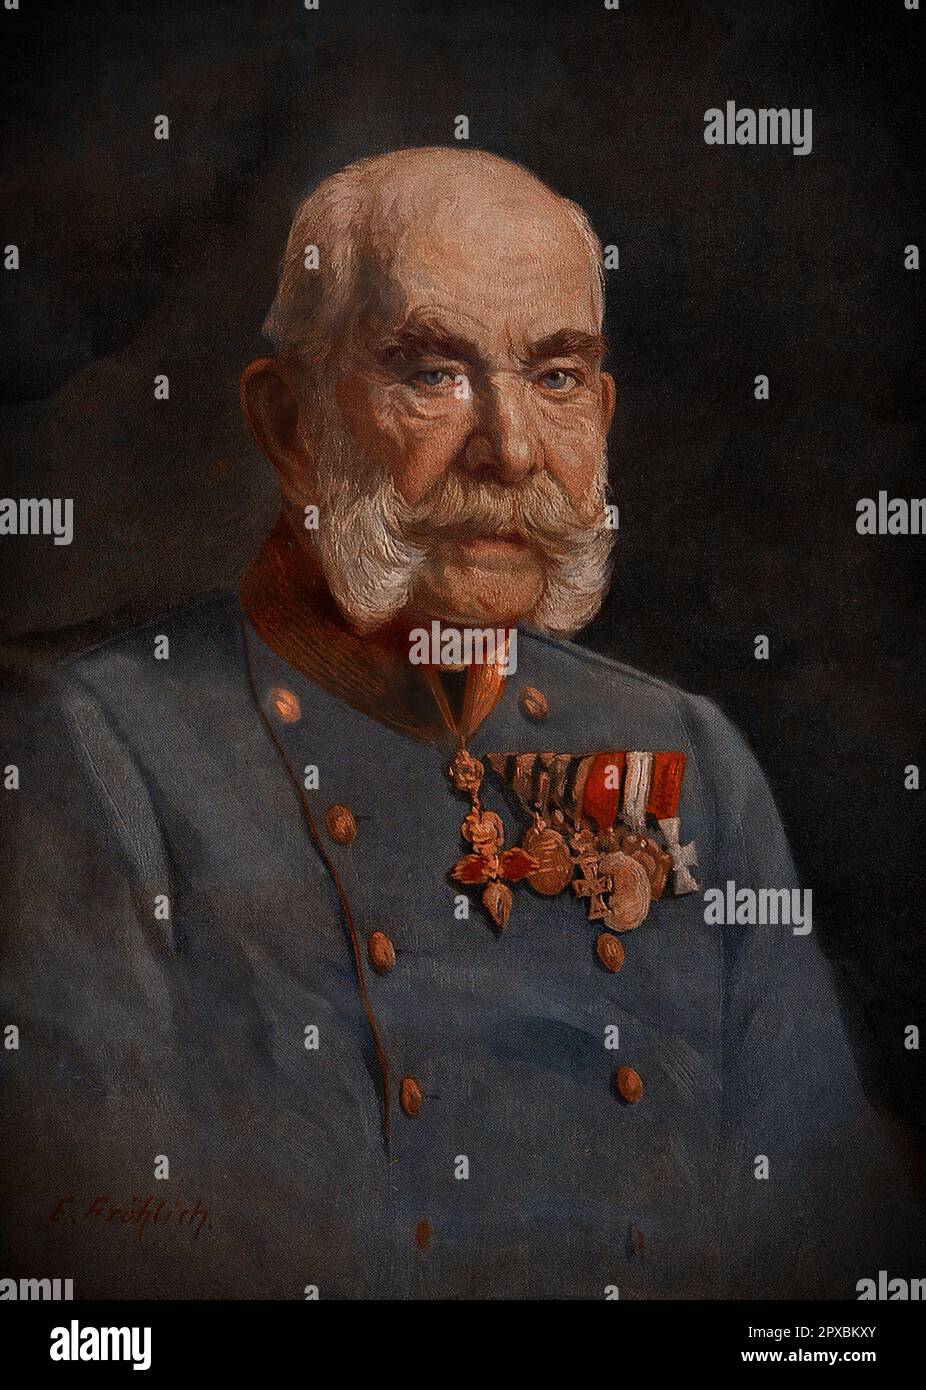 World War I. Franz Joseph I, Emperor of Austria, Apostolic King of Hungary.  Franz Joseph I or Francis Joseph I (German: Franz Joseph Karl; Hungarian: Ferenc József Károly, 1830–1916) was Emperor of Austria, King of Hungary, and the other states of the Habsburg monarchy from 2 December 1848 until his death on 21 November 1916. Stock Photo